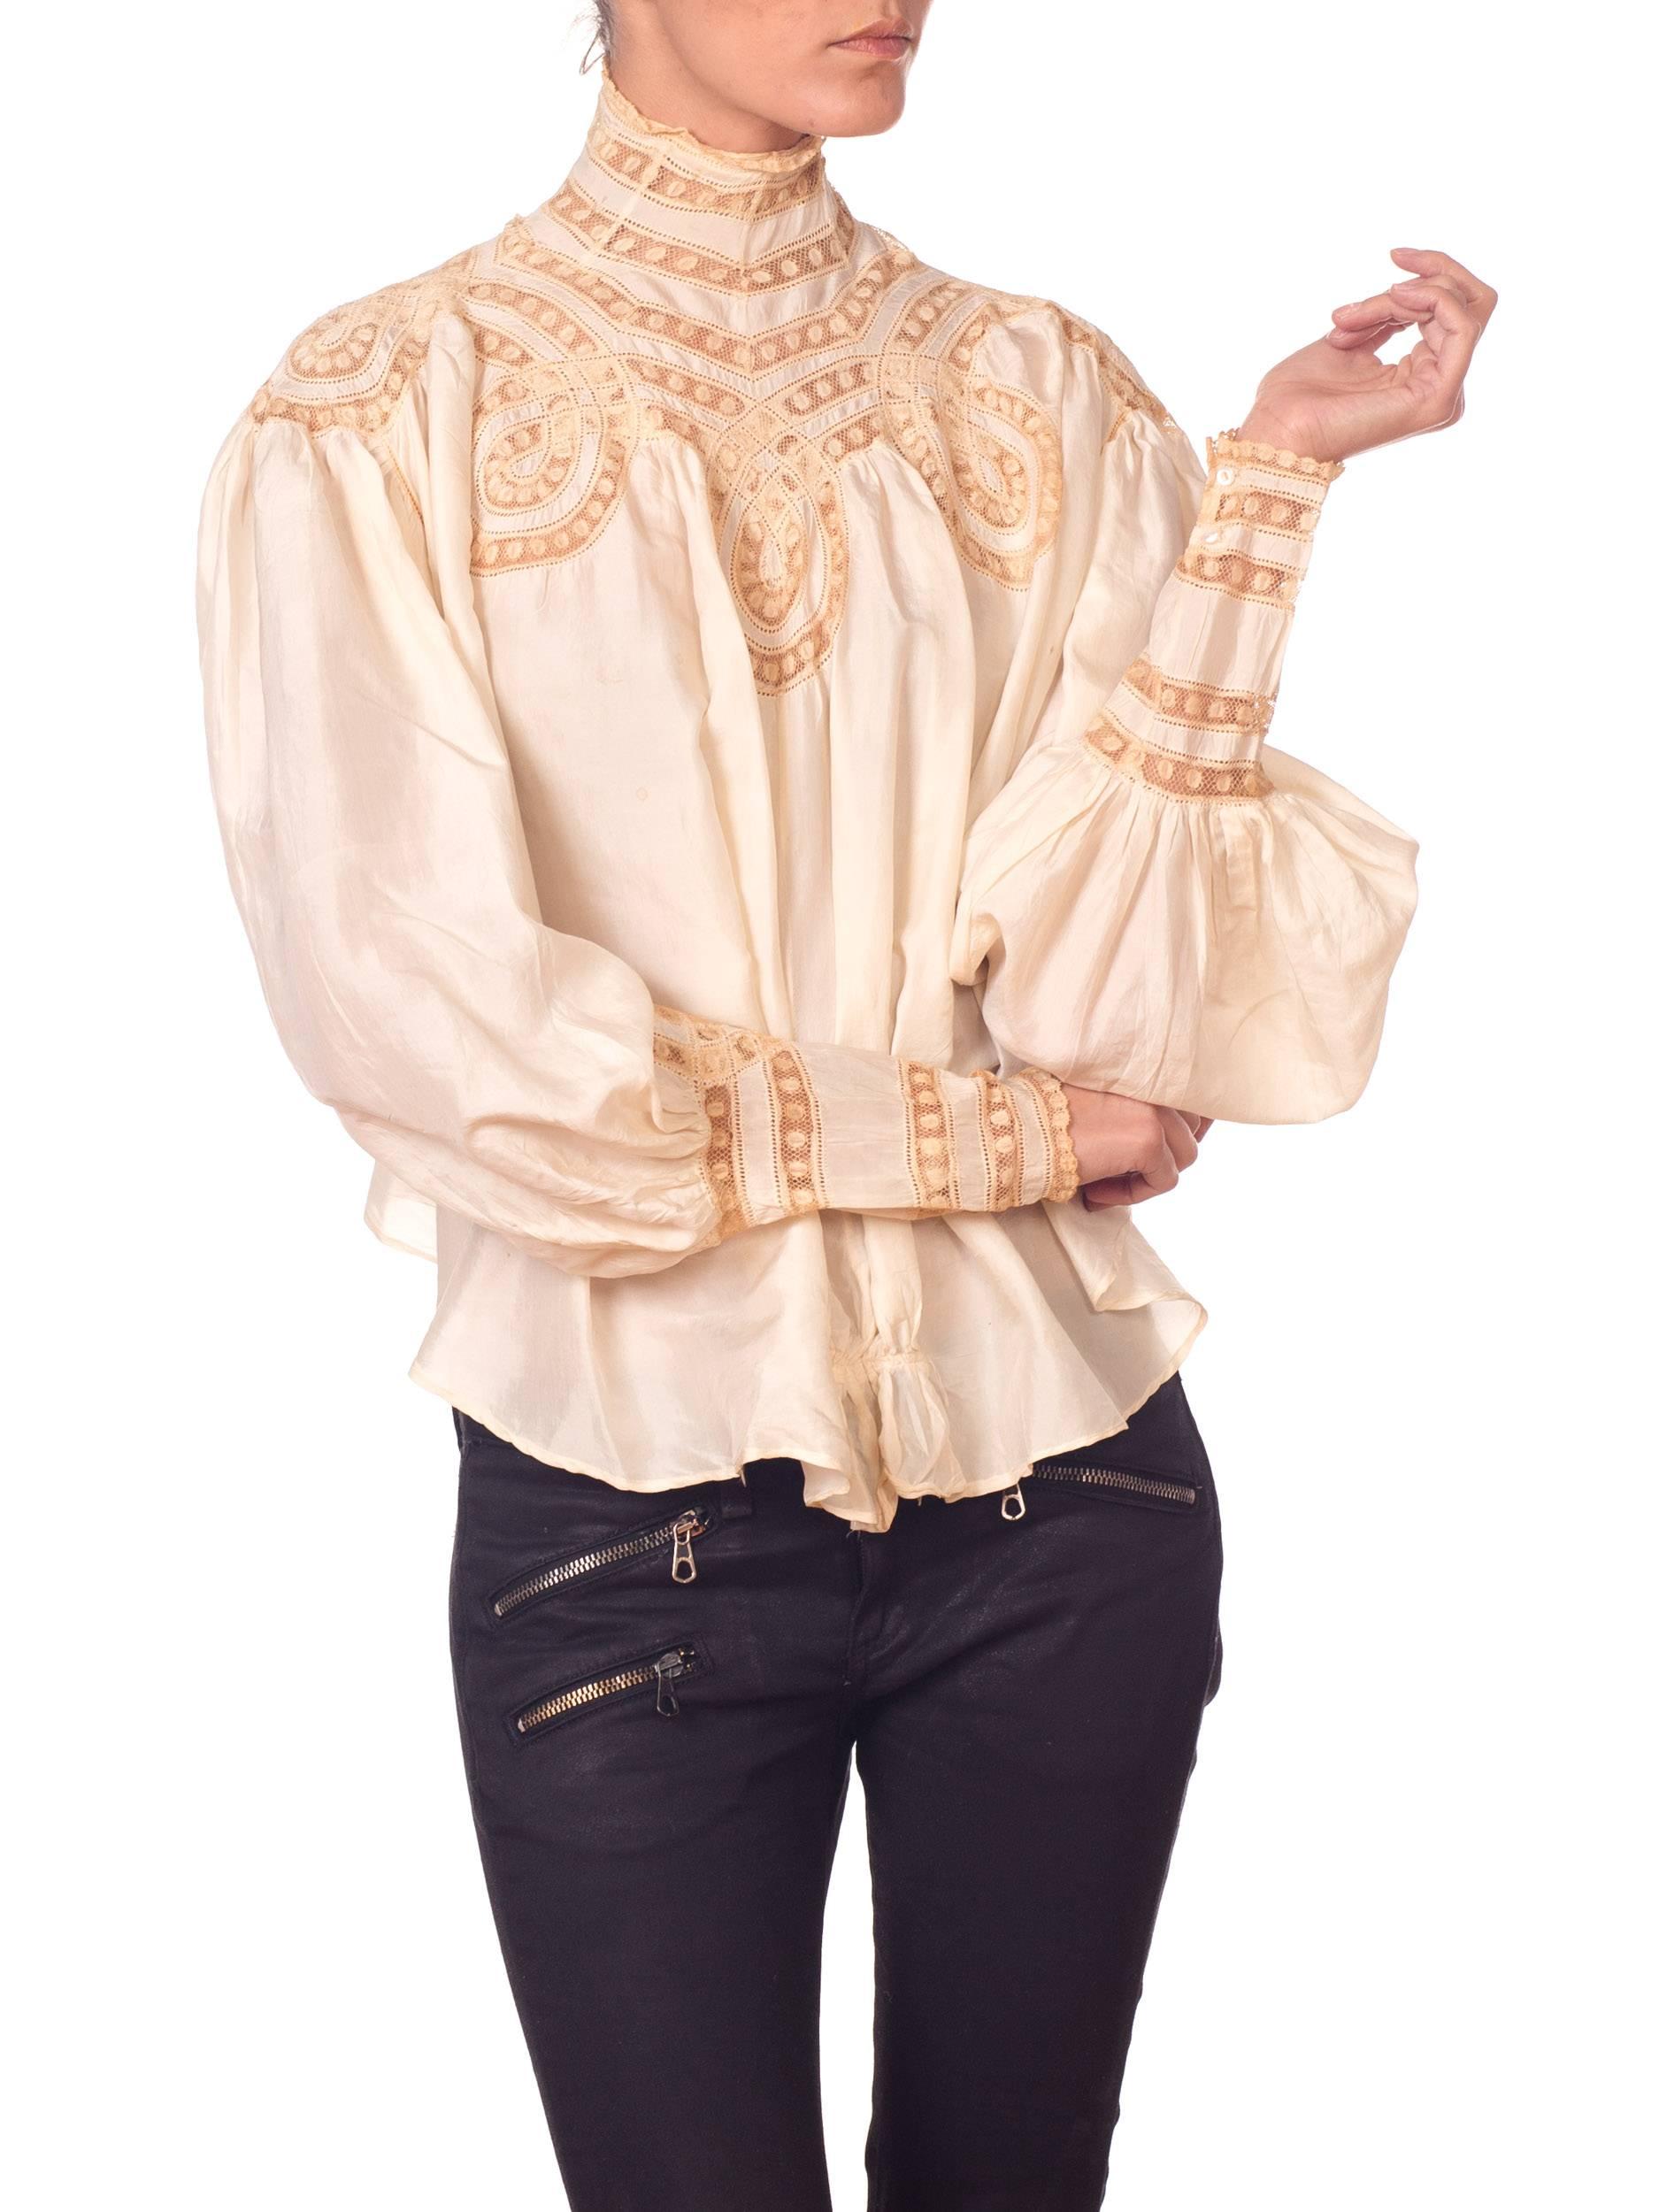 Victorian high neck Silk Top with Swirls Of Lace Inlay Details 2